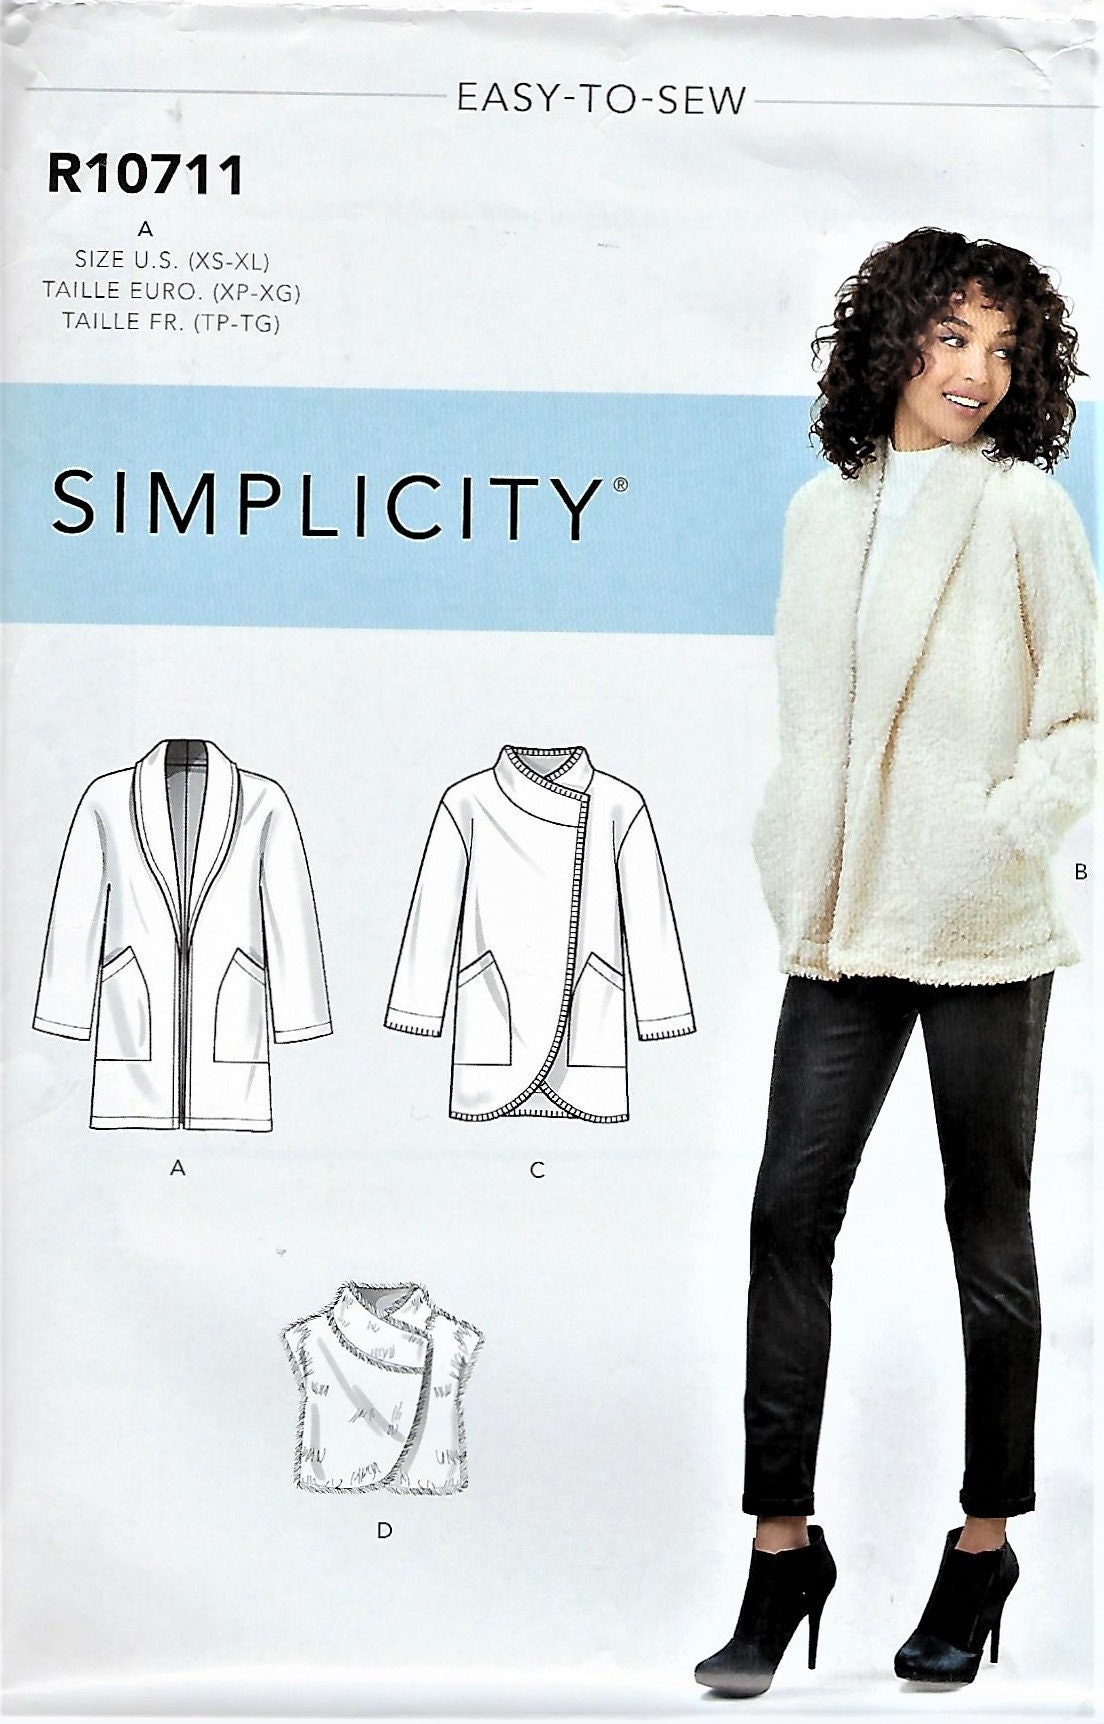 Simplicity Pattern R10711/8218Misses' Easy-to-Sew | Etsy